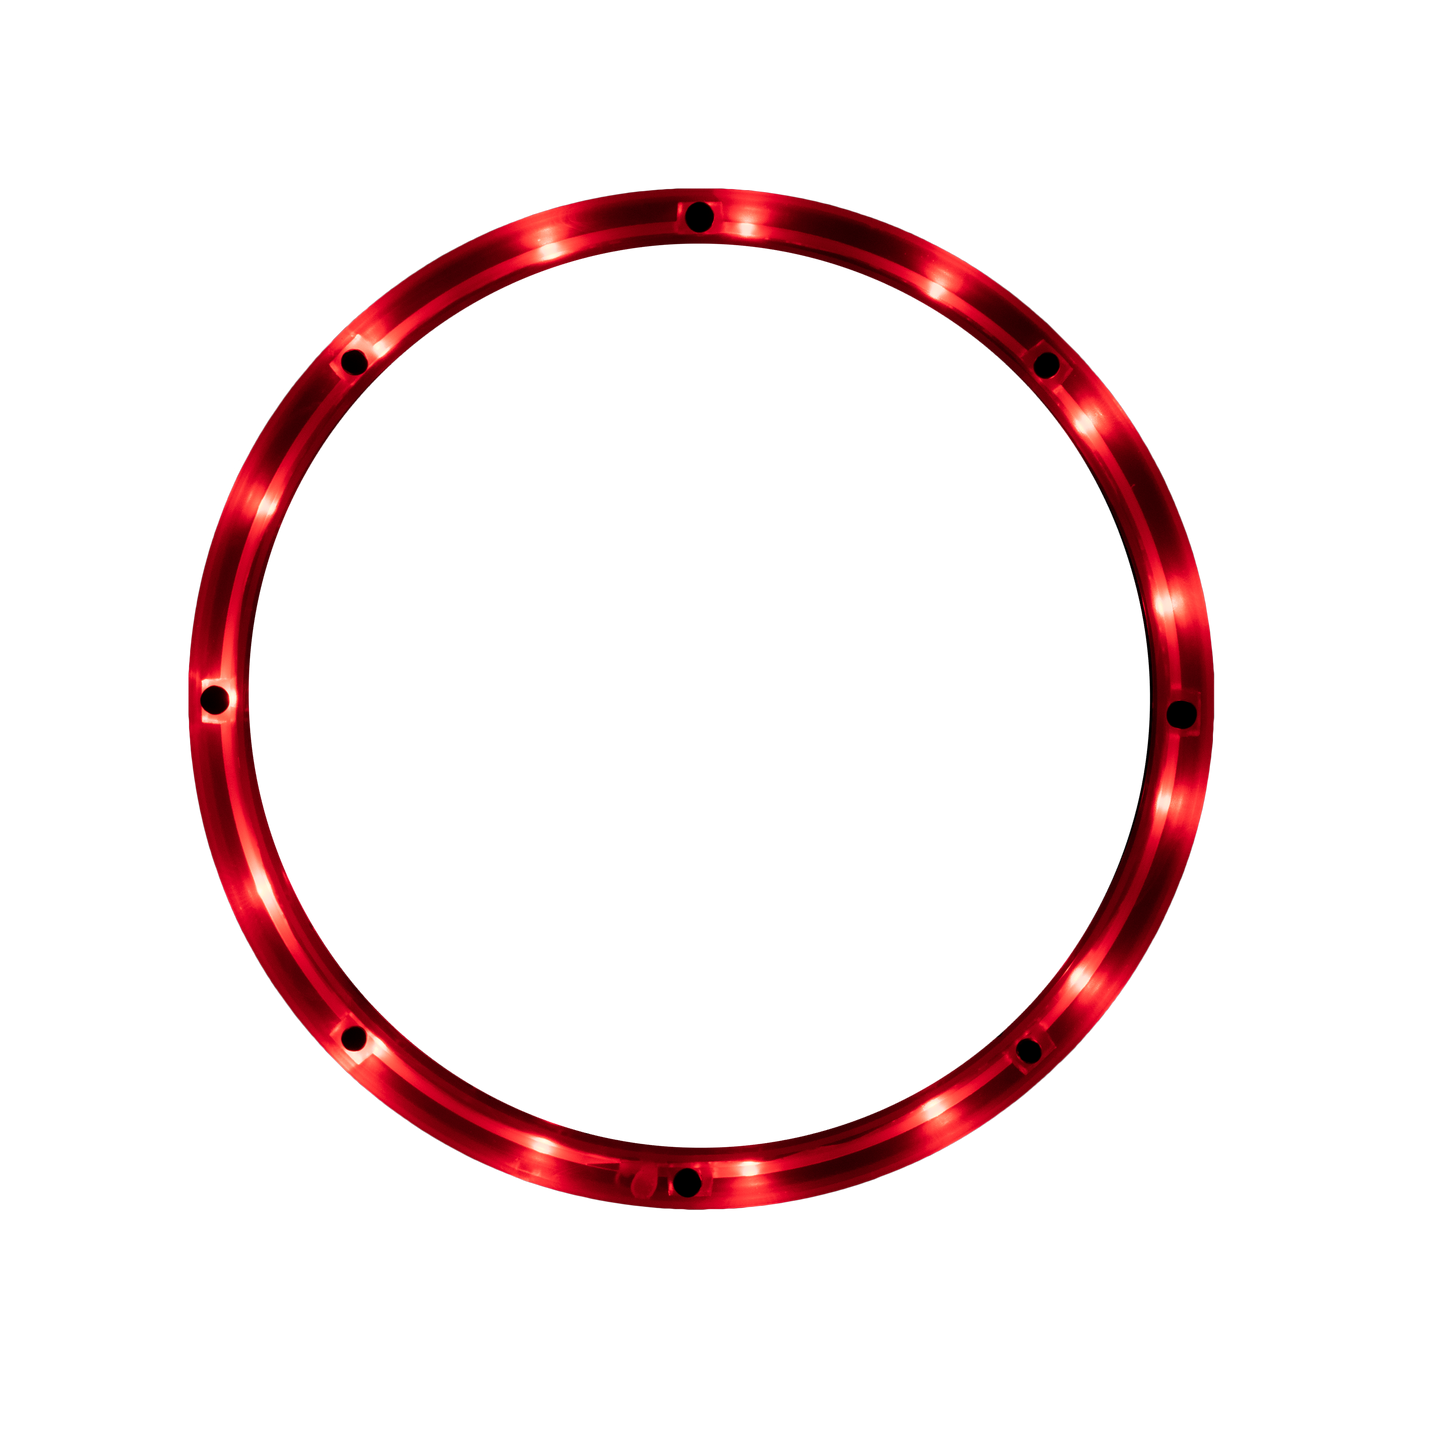 BSA12LED | Universal 12" RGB LED Subwoofer Light Ring with Remote